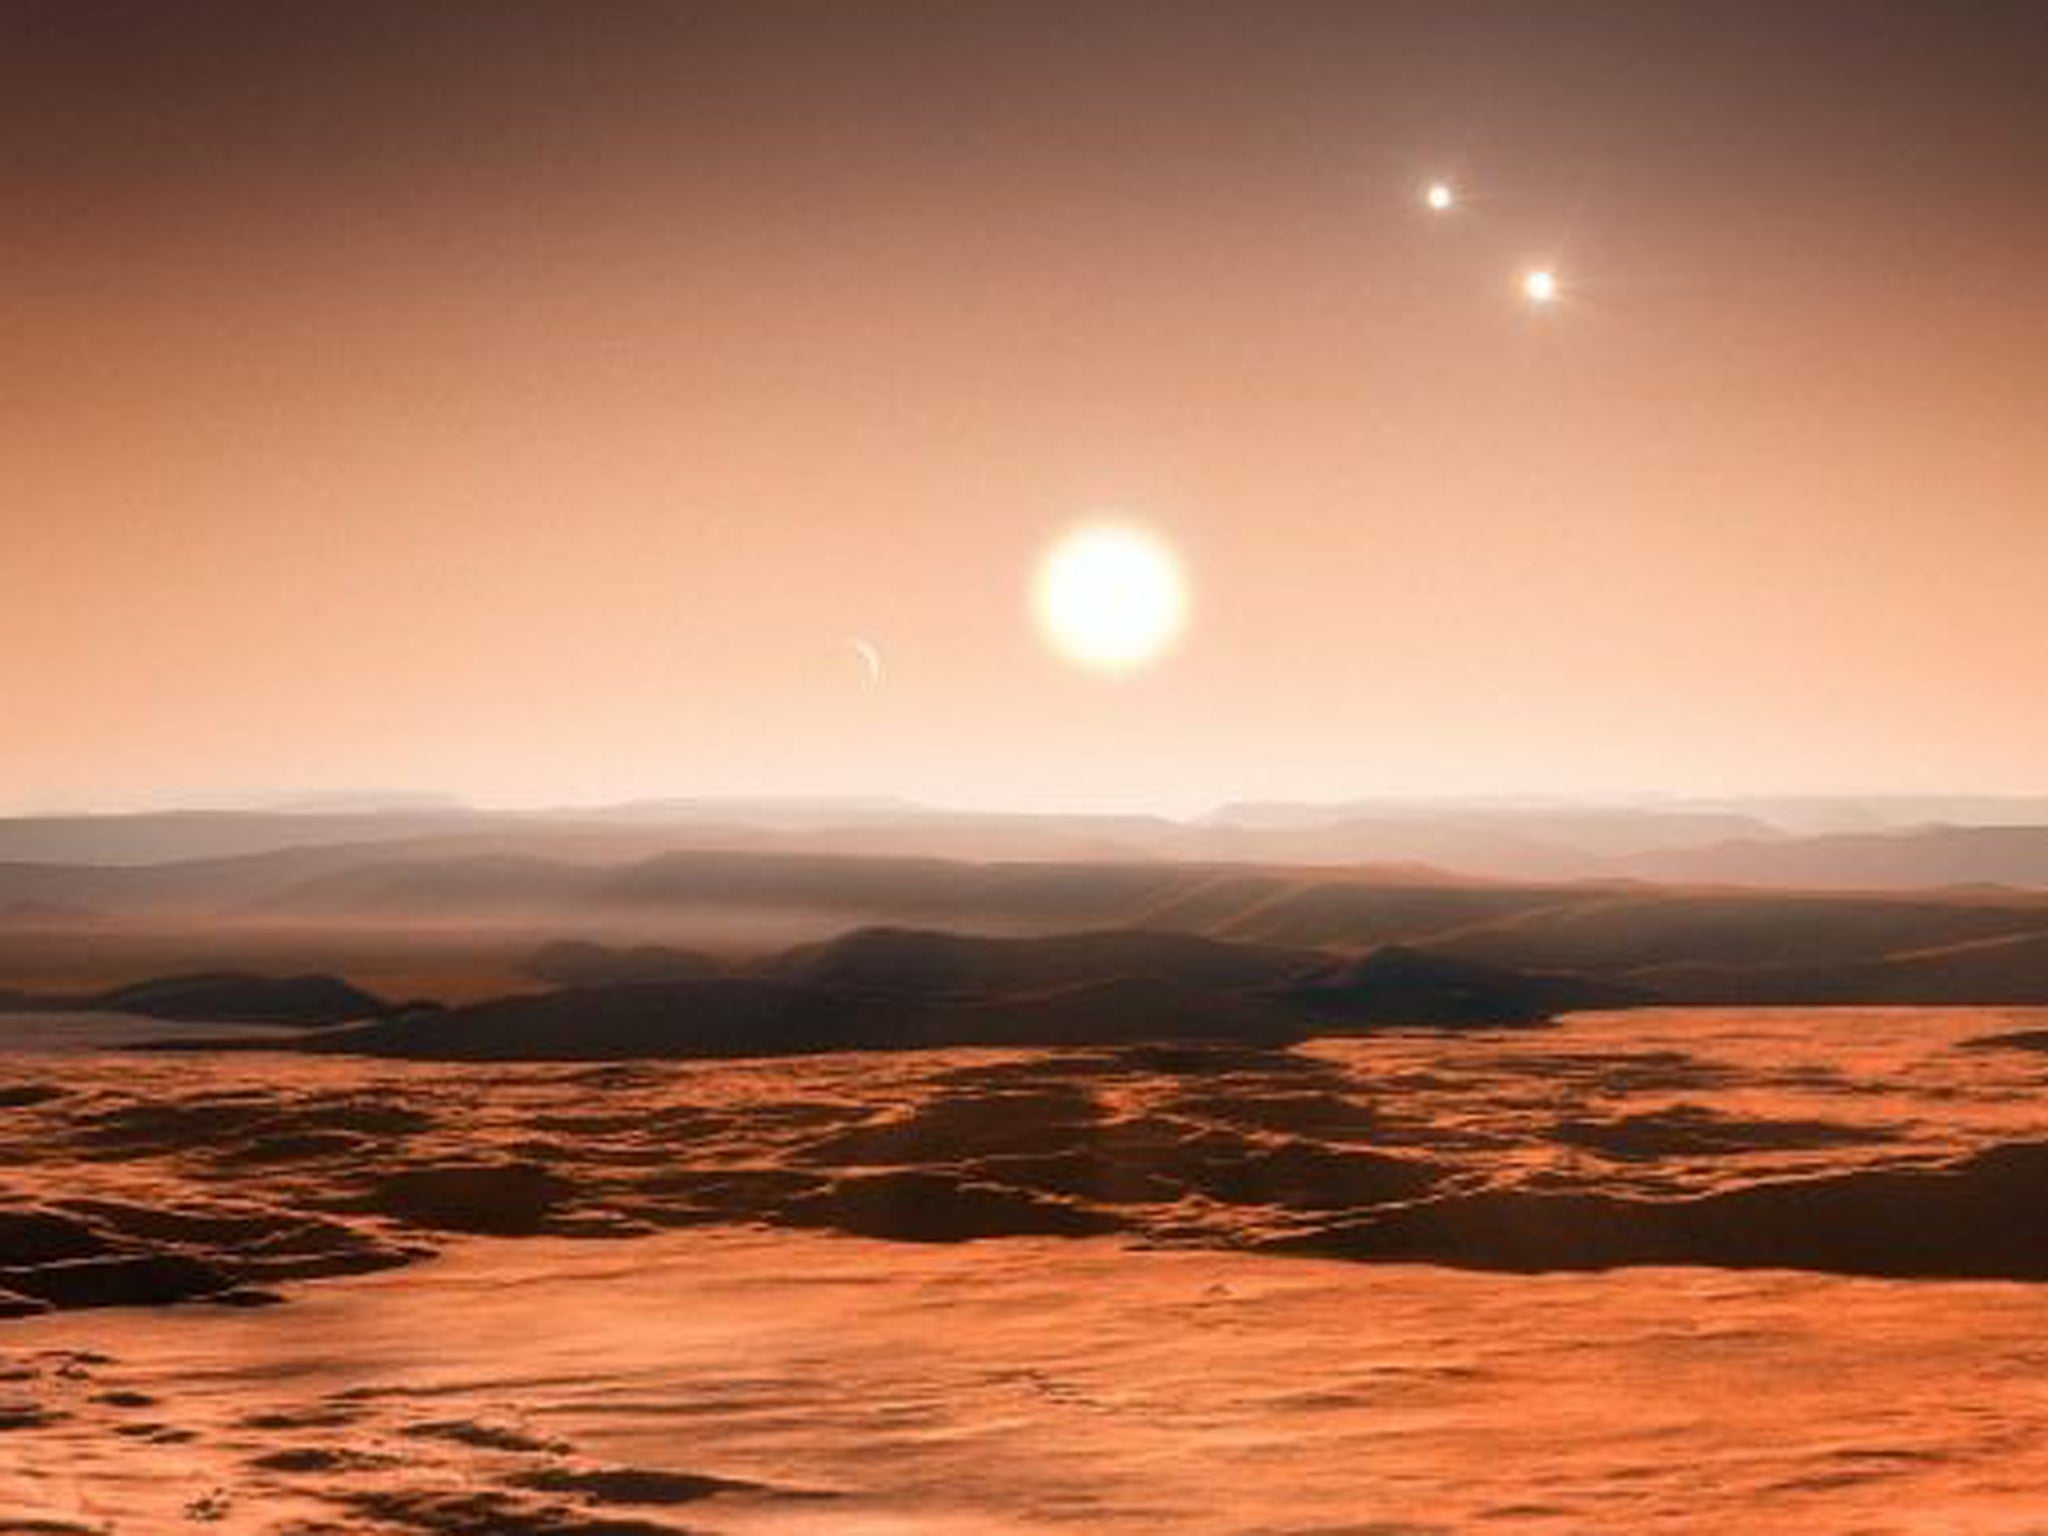 An image provided by the European Southern Observatory (ESO) shows an artists impression of the view from the exoplanet Gliese 667Cd looking towards the planet's parent star (Gliese 667C). In the background to the right, the more distant stars in this tri